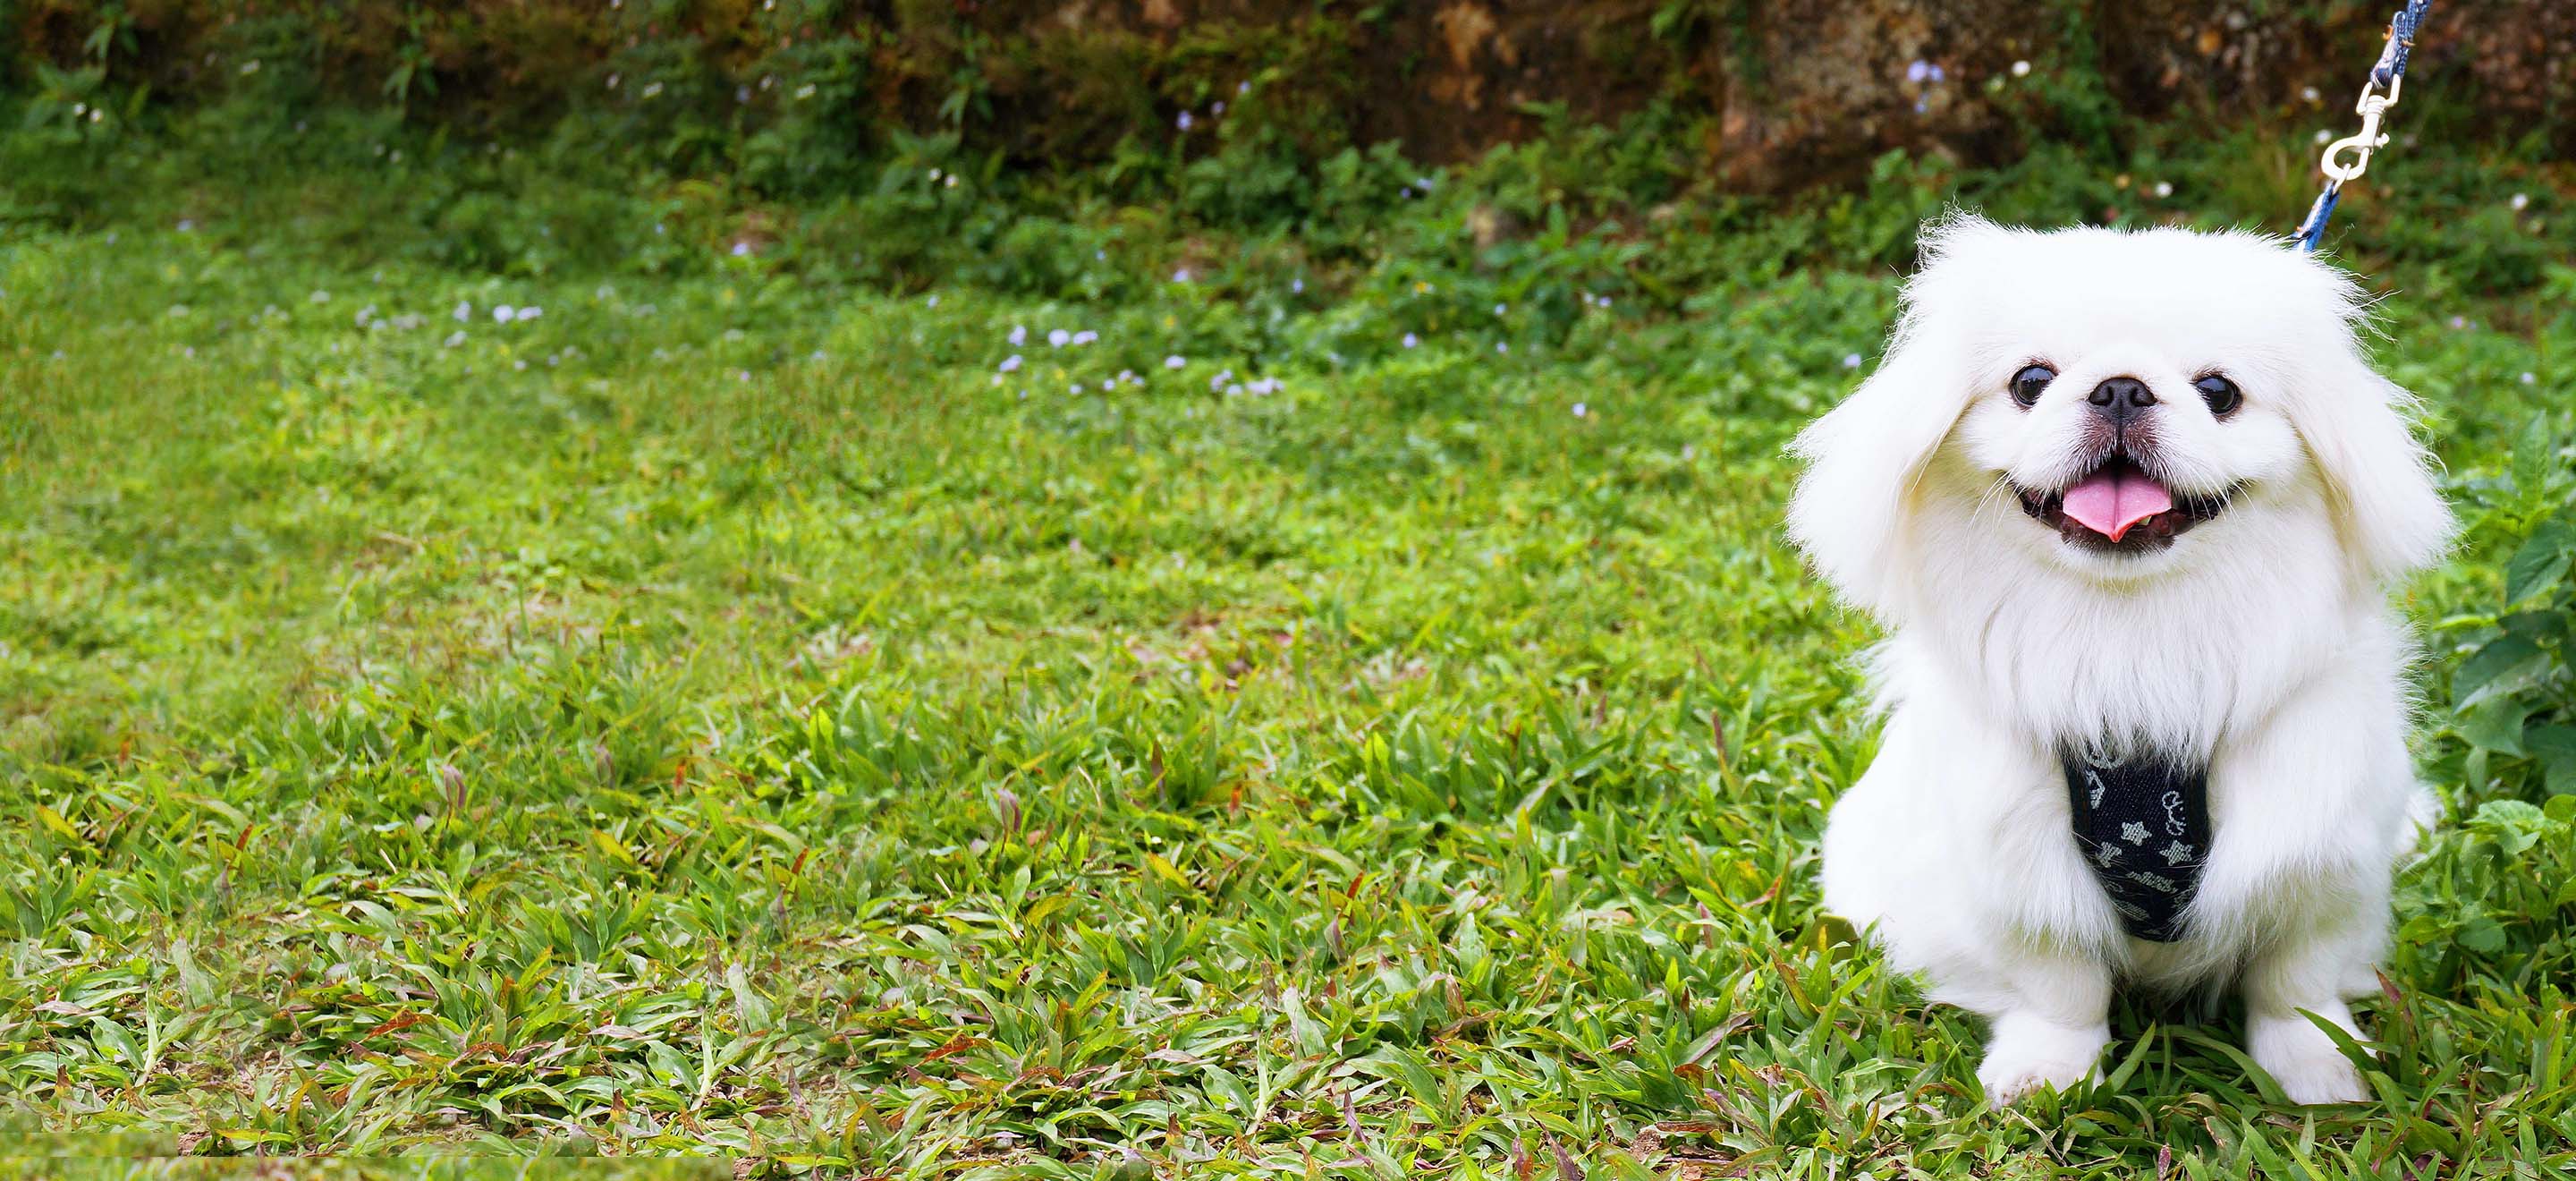 A white Pekingese dog on a leash posing happily in the grass image